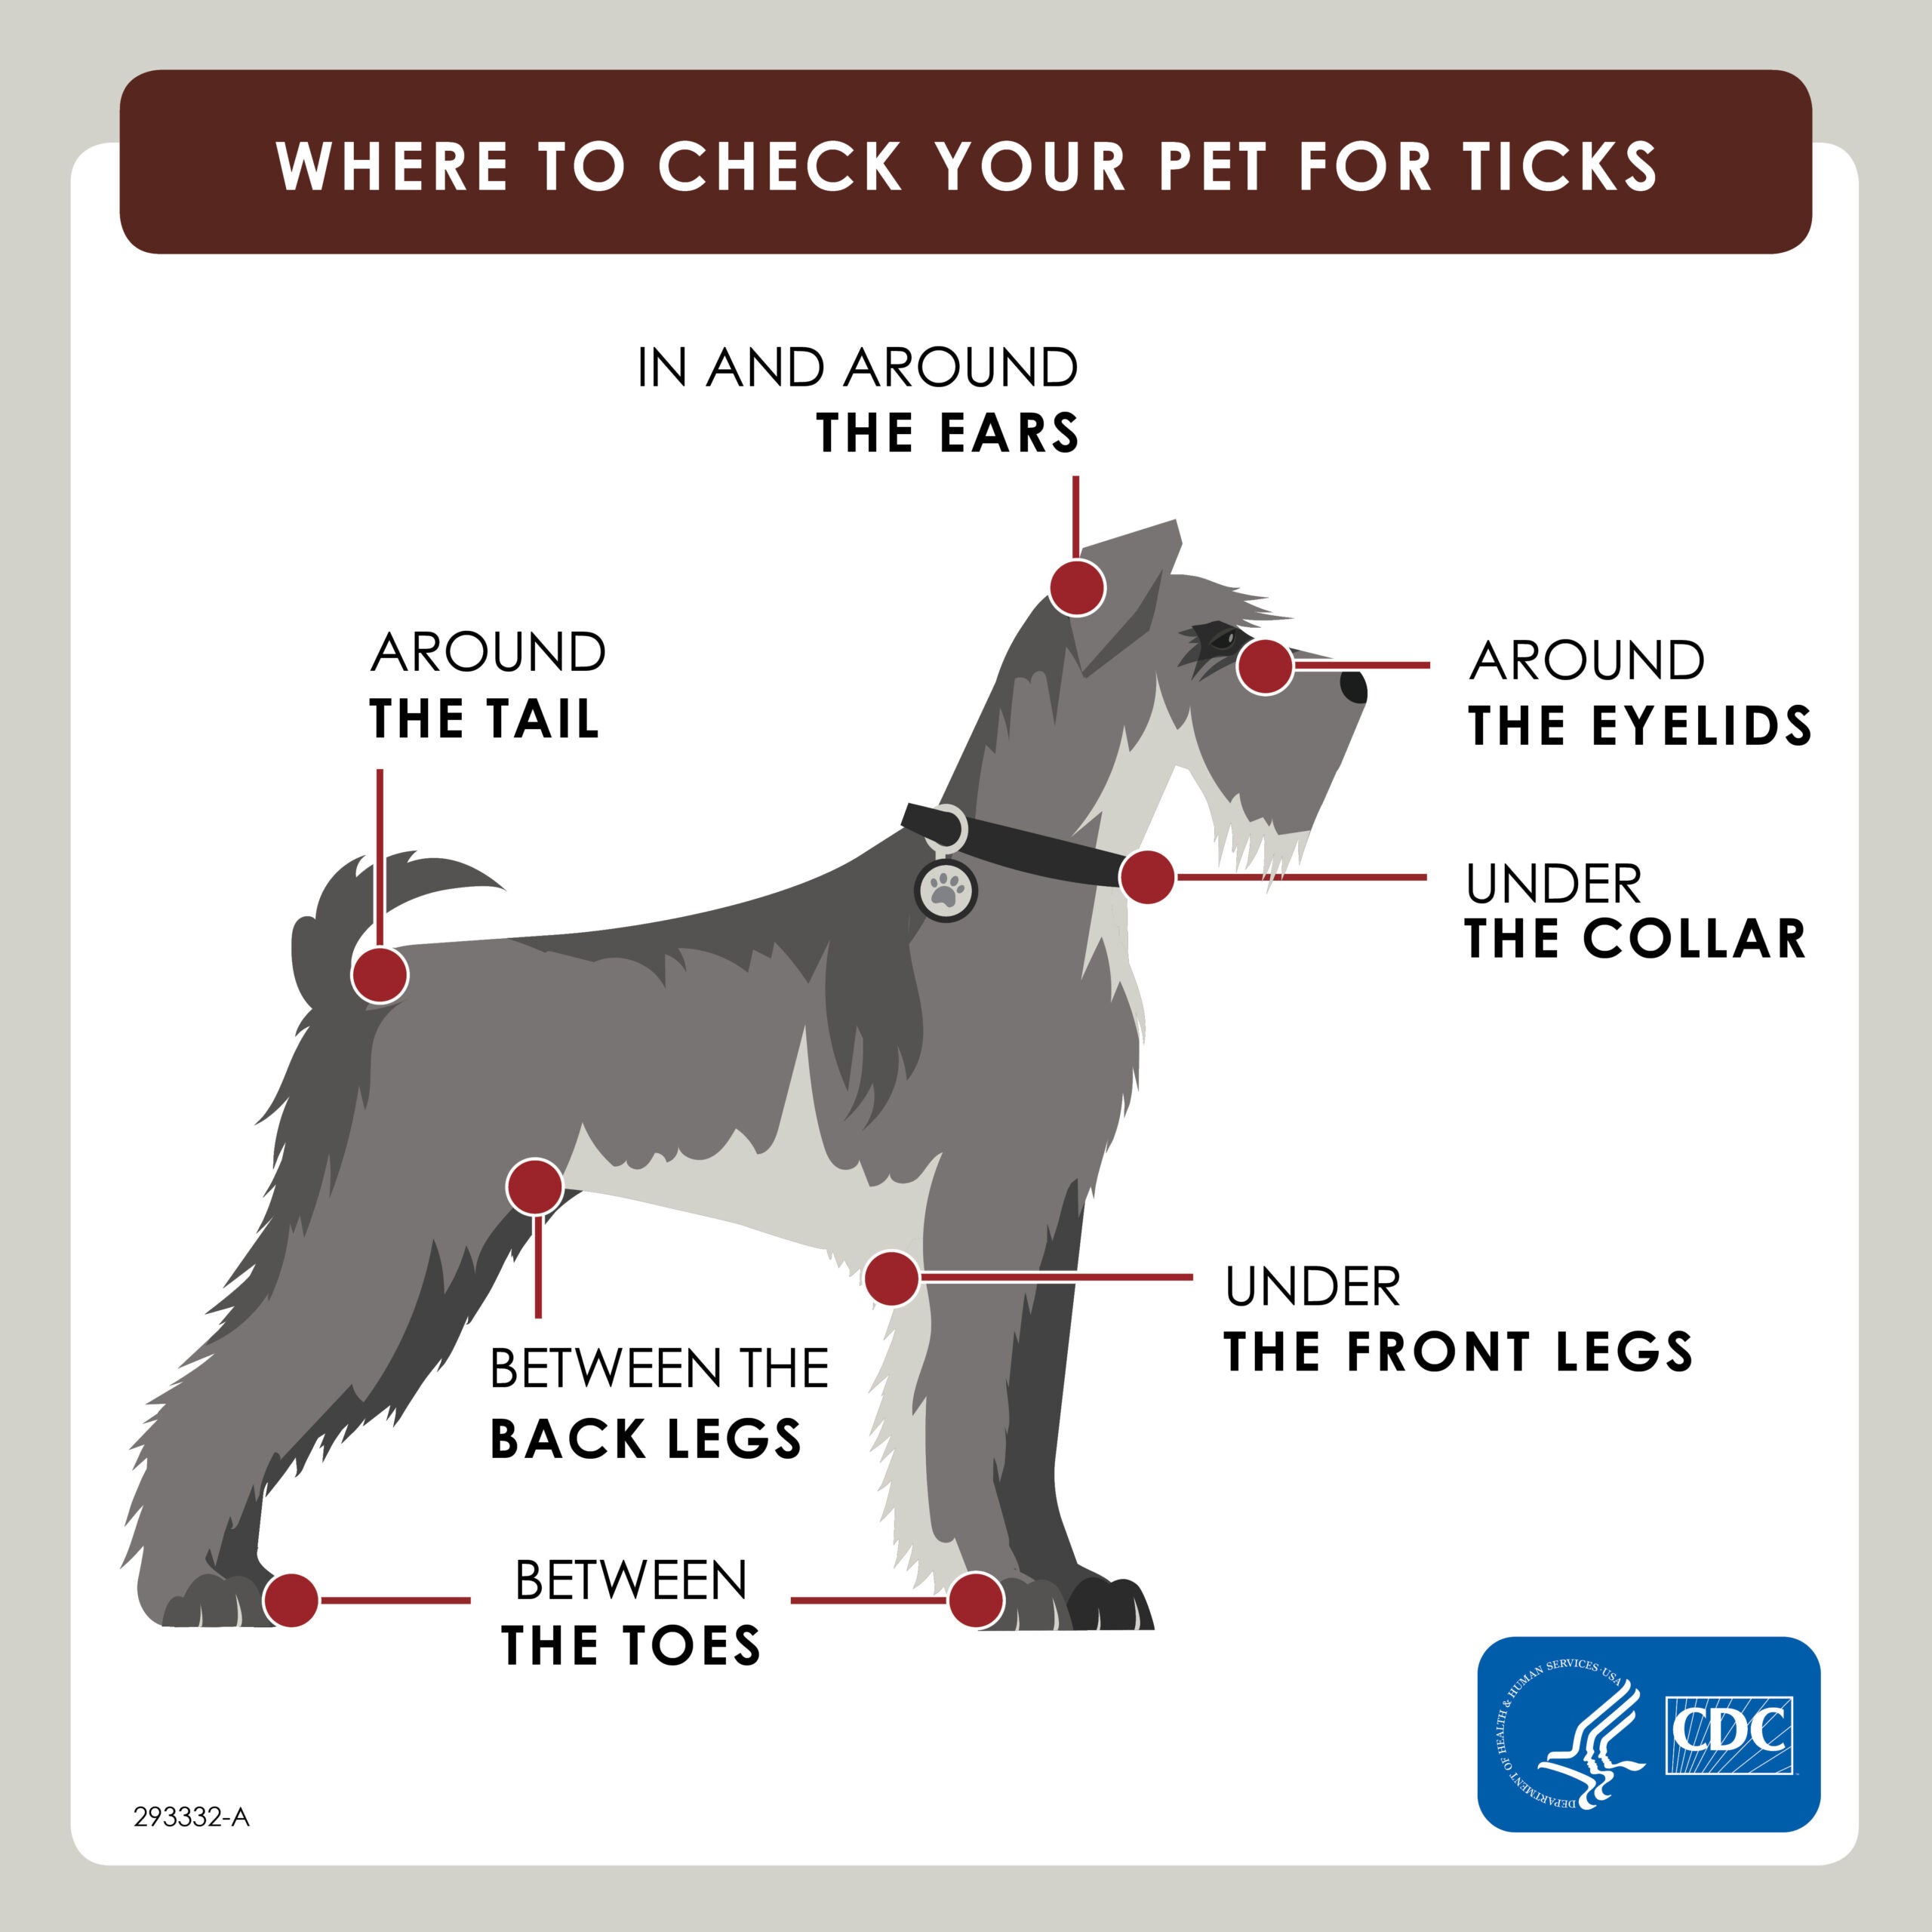 a guide on where to check your dog for ticks